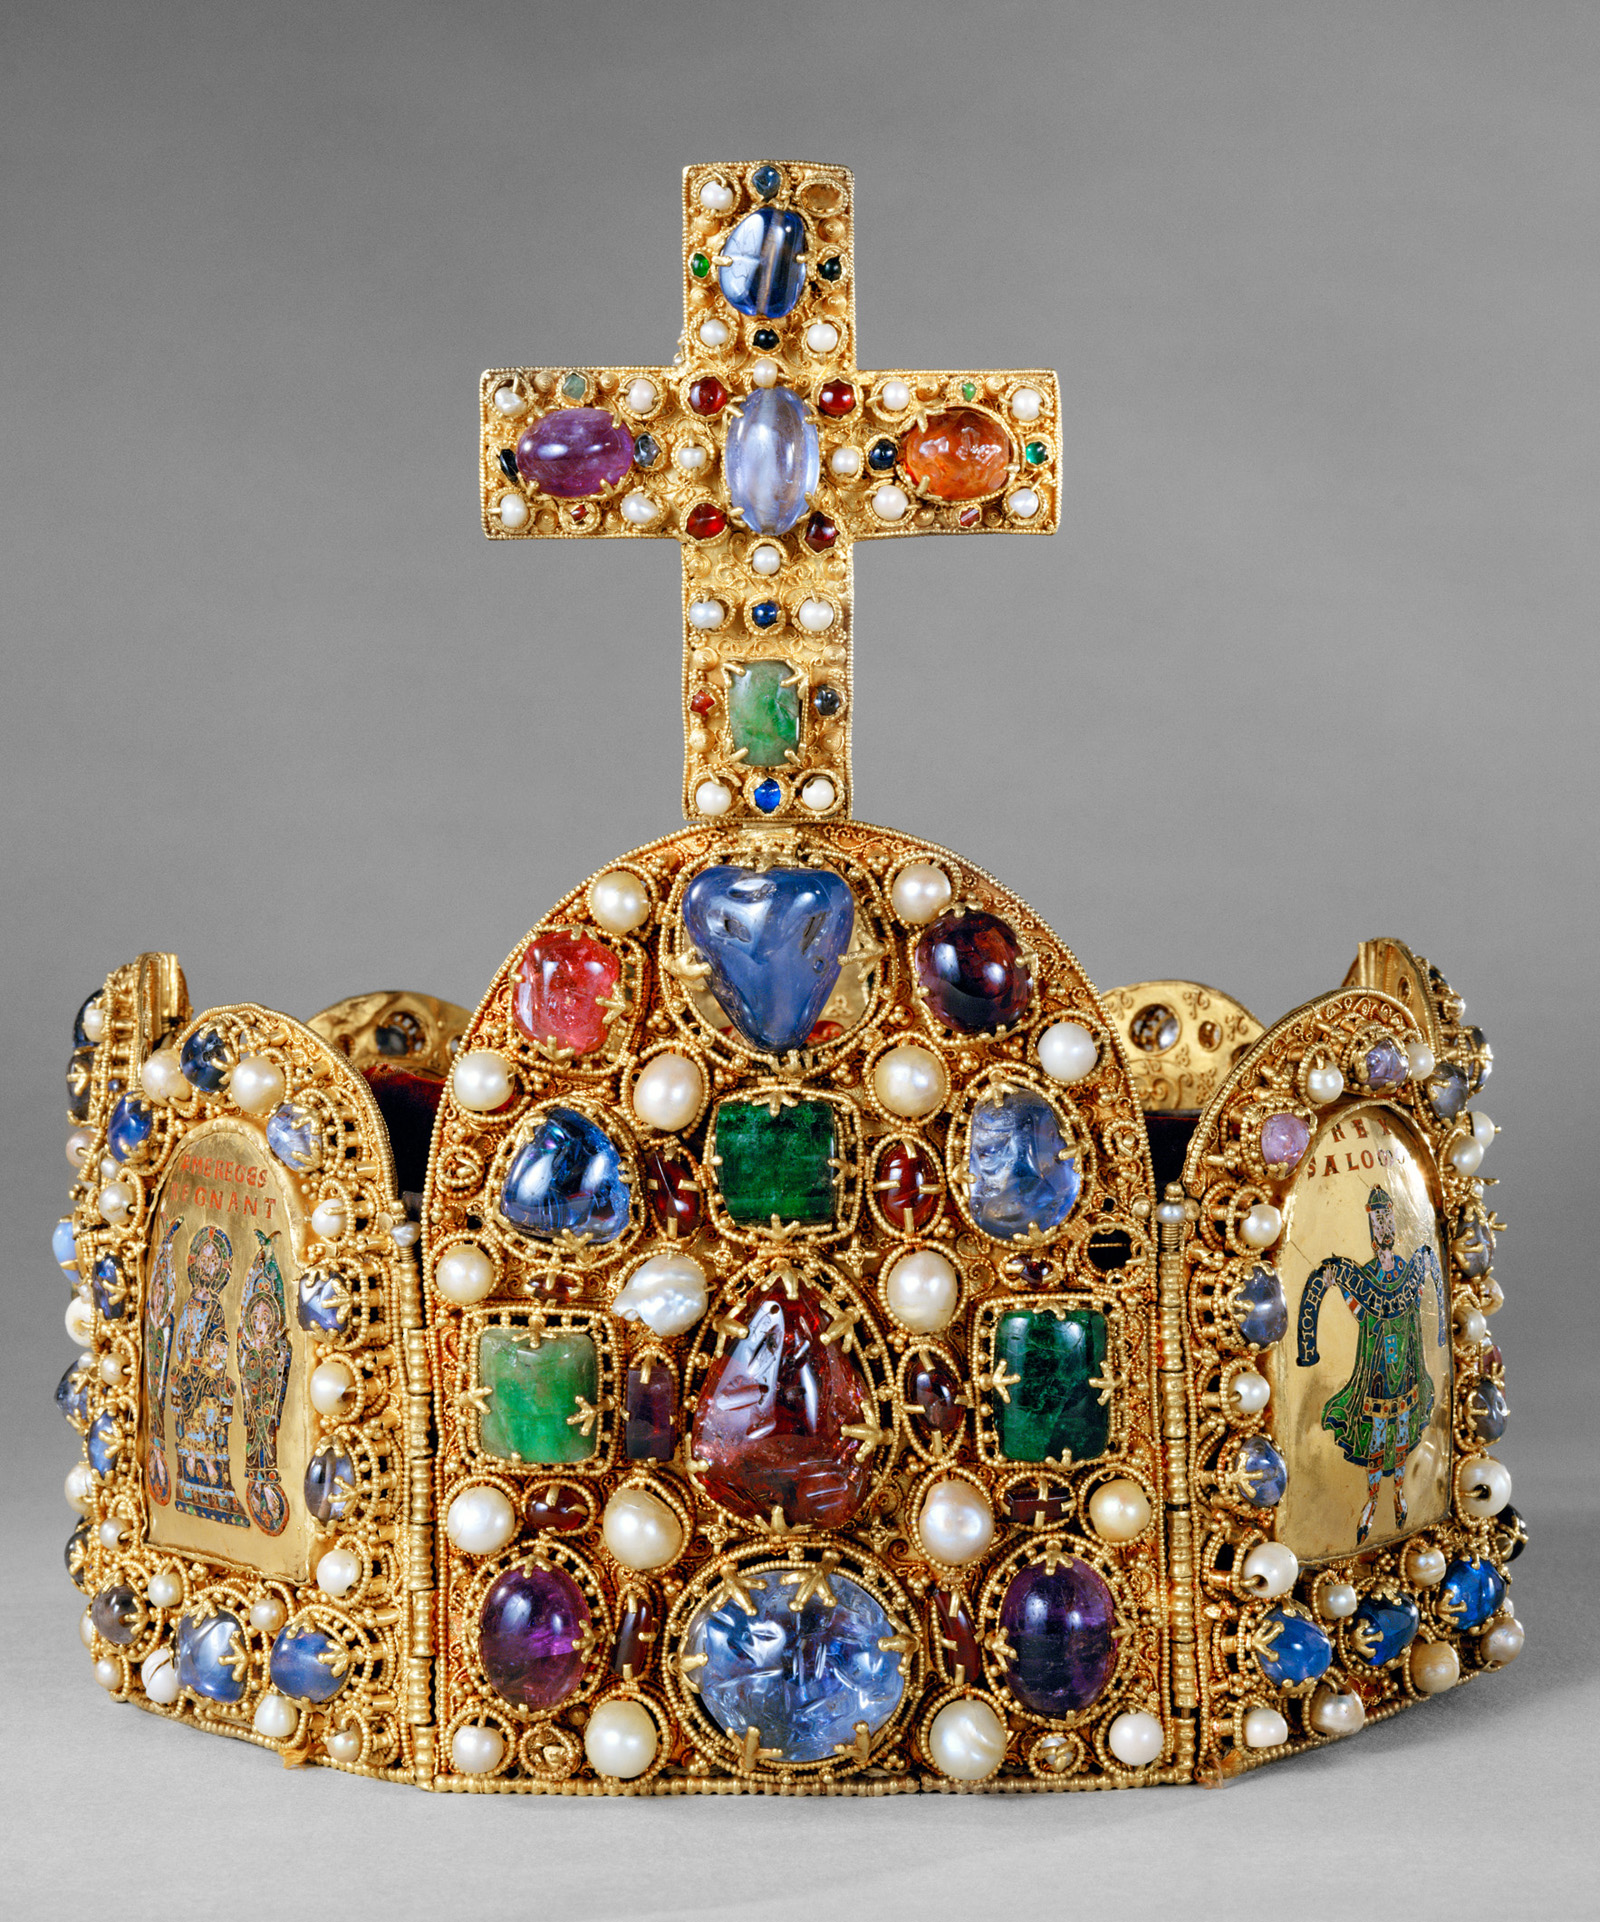 Crown of the Holy Roman Empire, KHM, Imperial Treasury Vienna